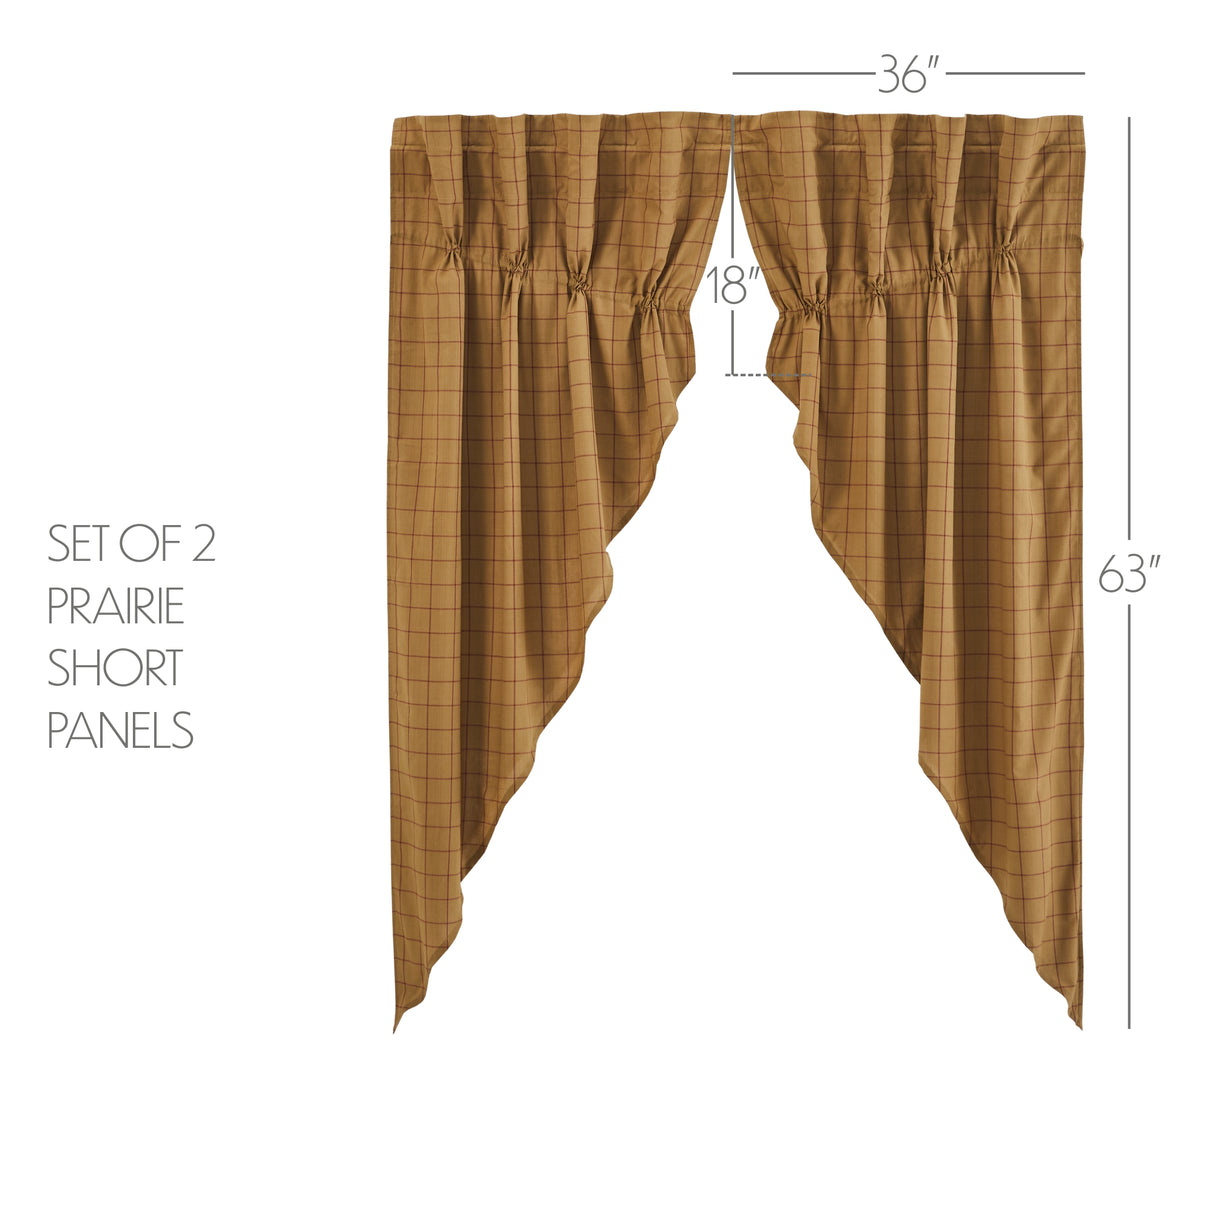 84415-Connell-Prairie-Short-Panel-Set-of-2-63x36x18-image-4